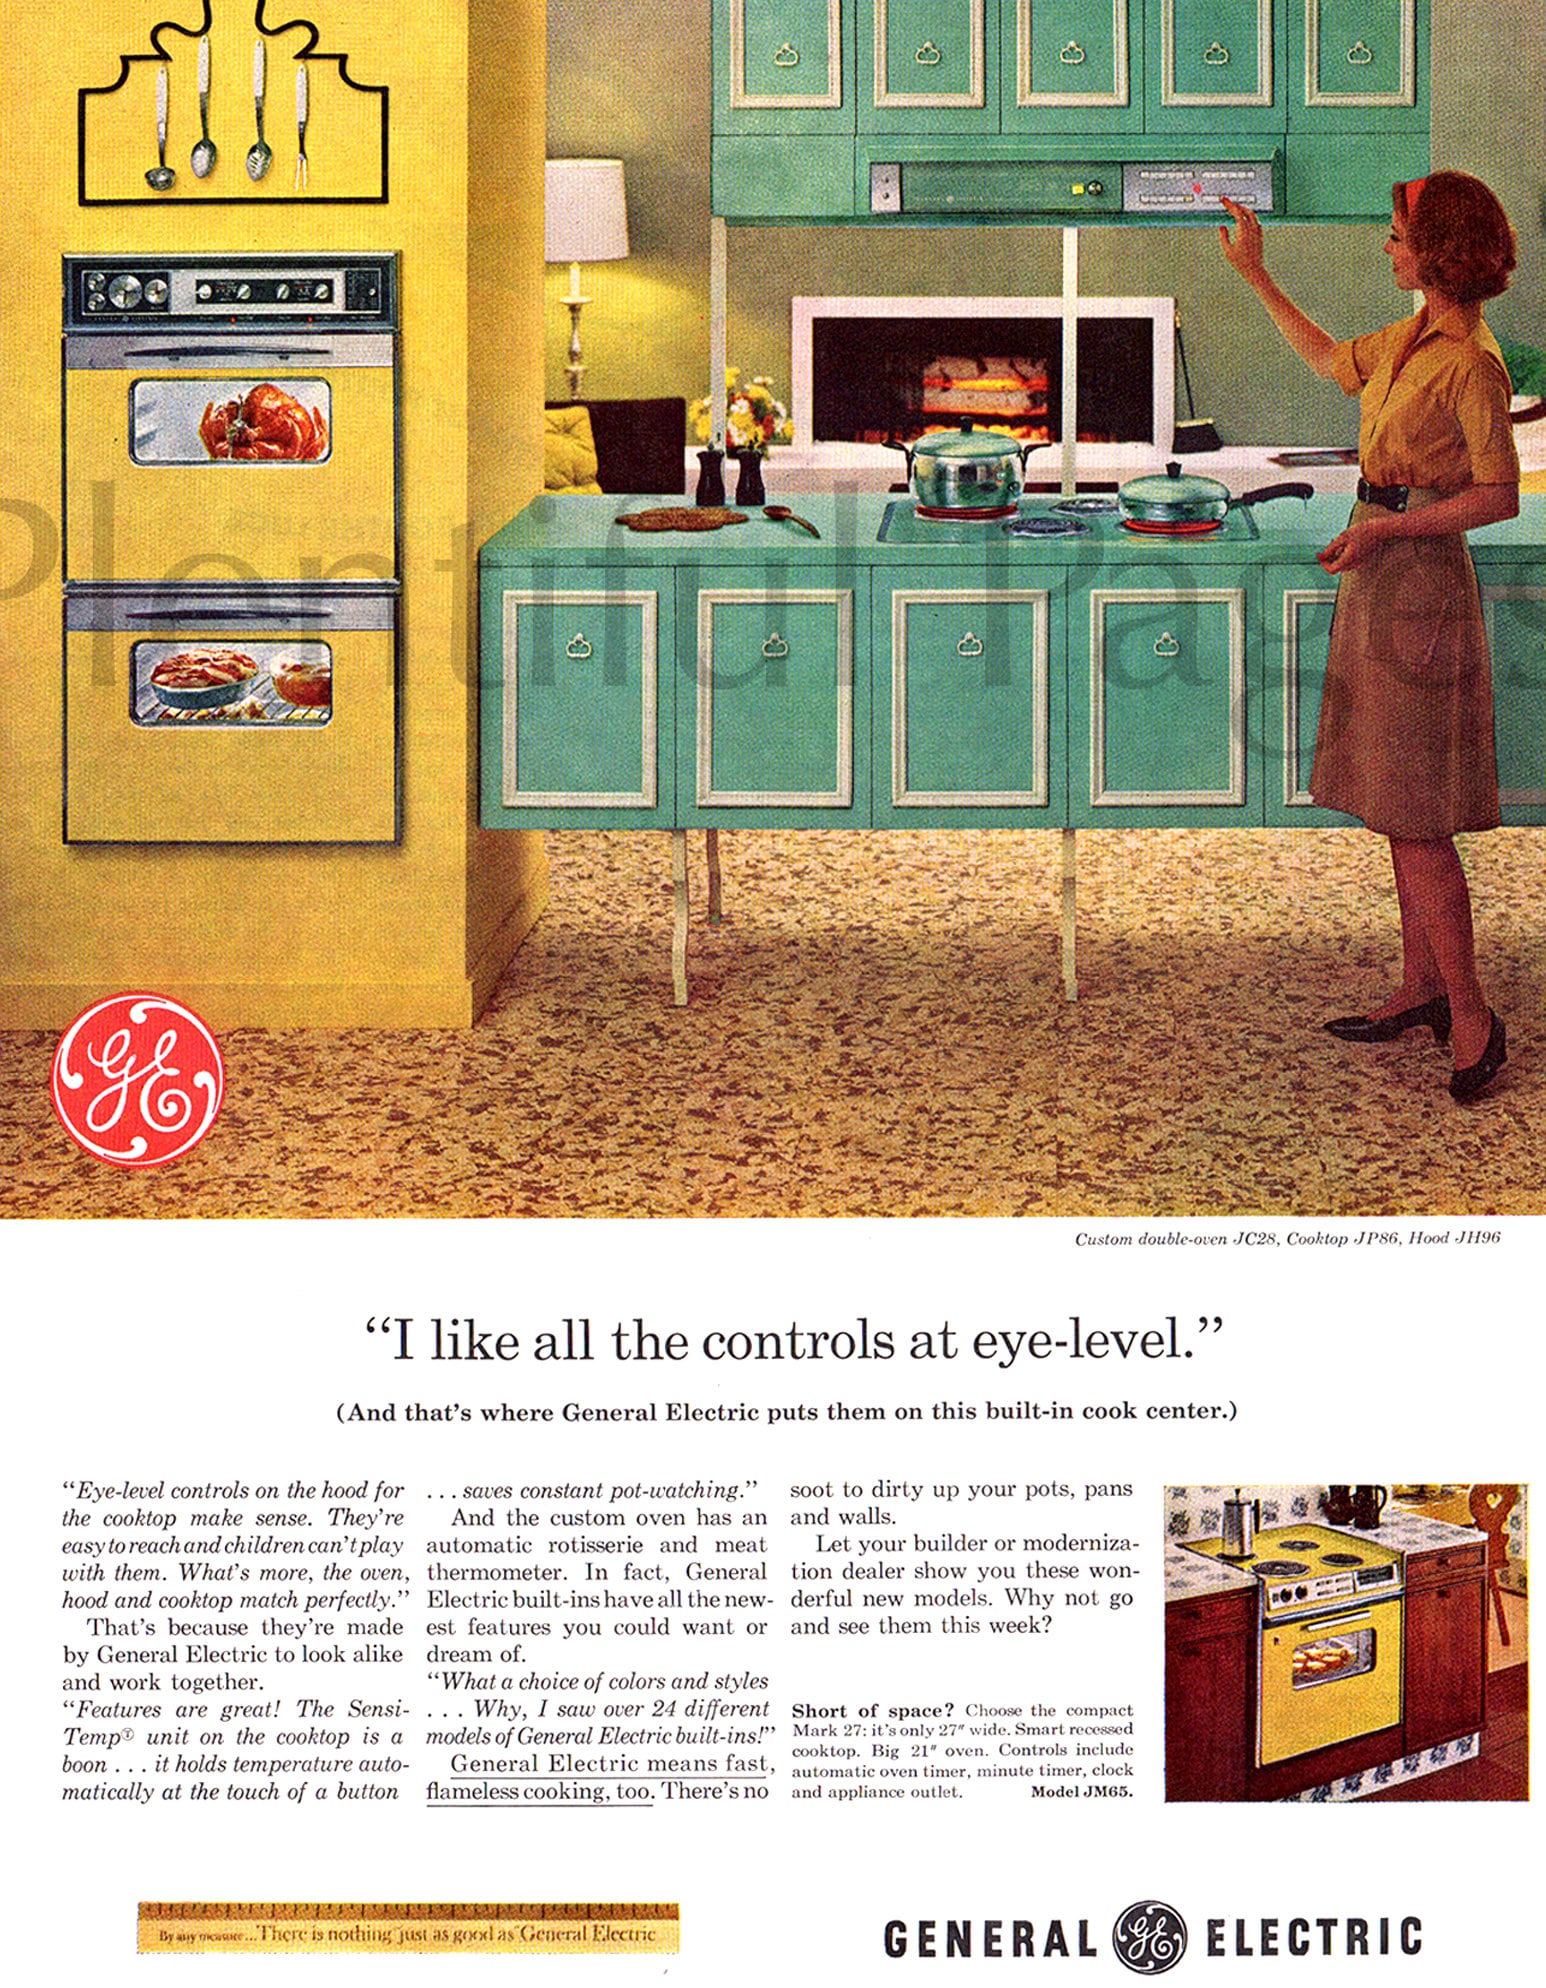 Print ad for GM/Frigidaire kitchens. Info in comment. 1965 : r/vintageads